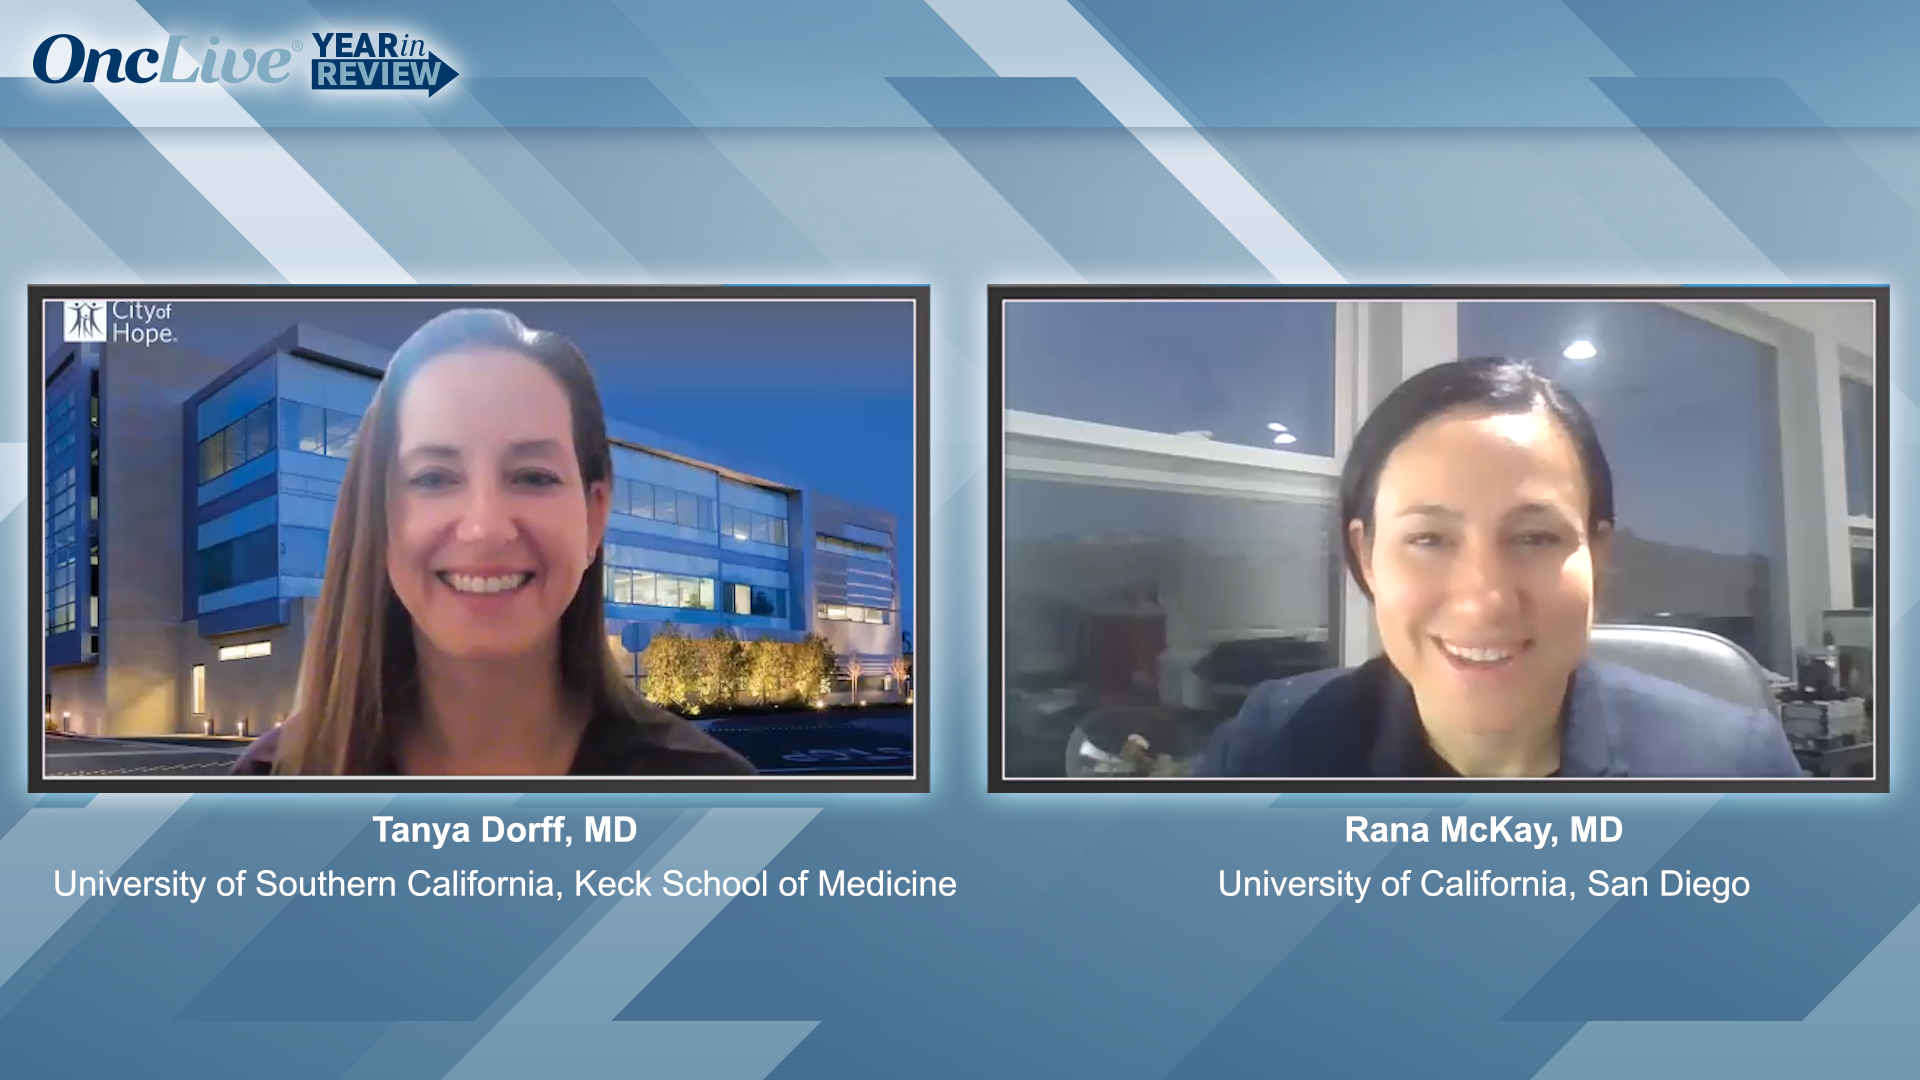 Tanya Dorff, MD, and Rana McKay, MD, experts on prostate cancer